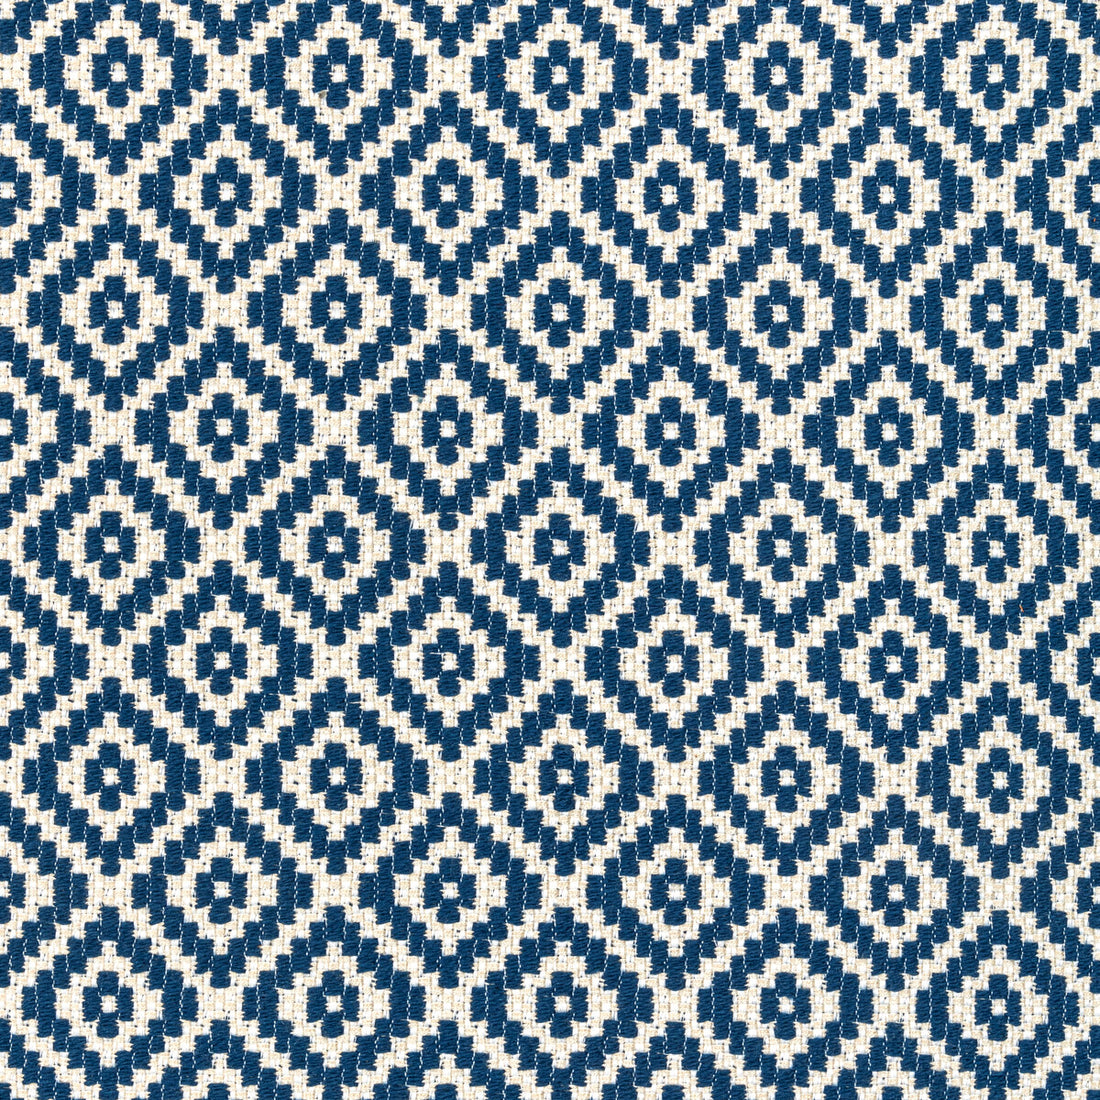 Kravet Design fabric in 36411-5 color - pattern 36411.5.0 - by Kravet Design in the Performance Crypton Home collection